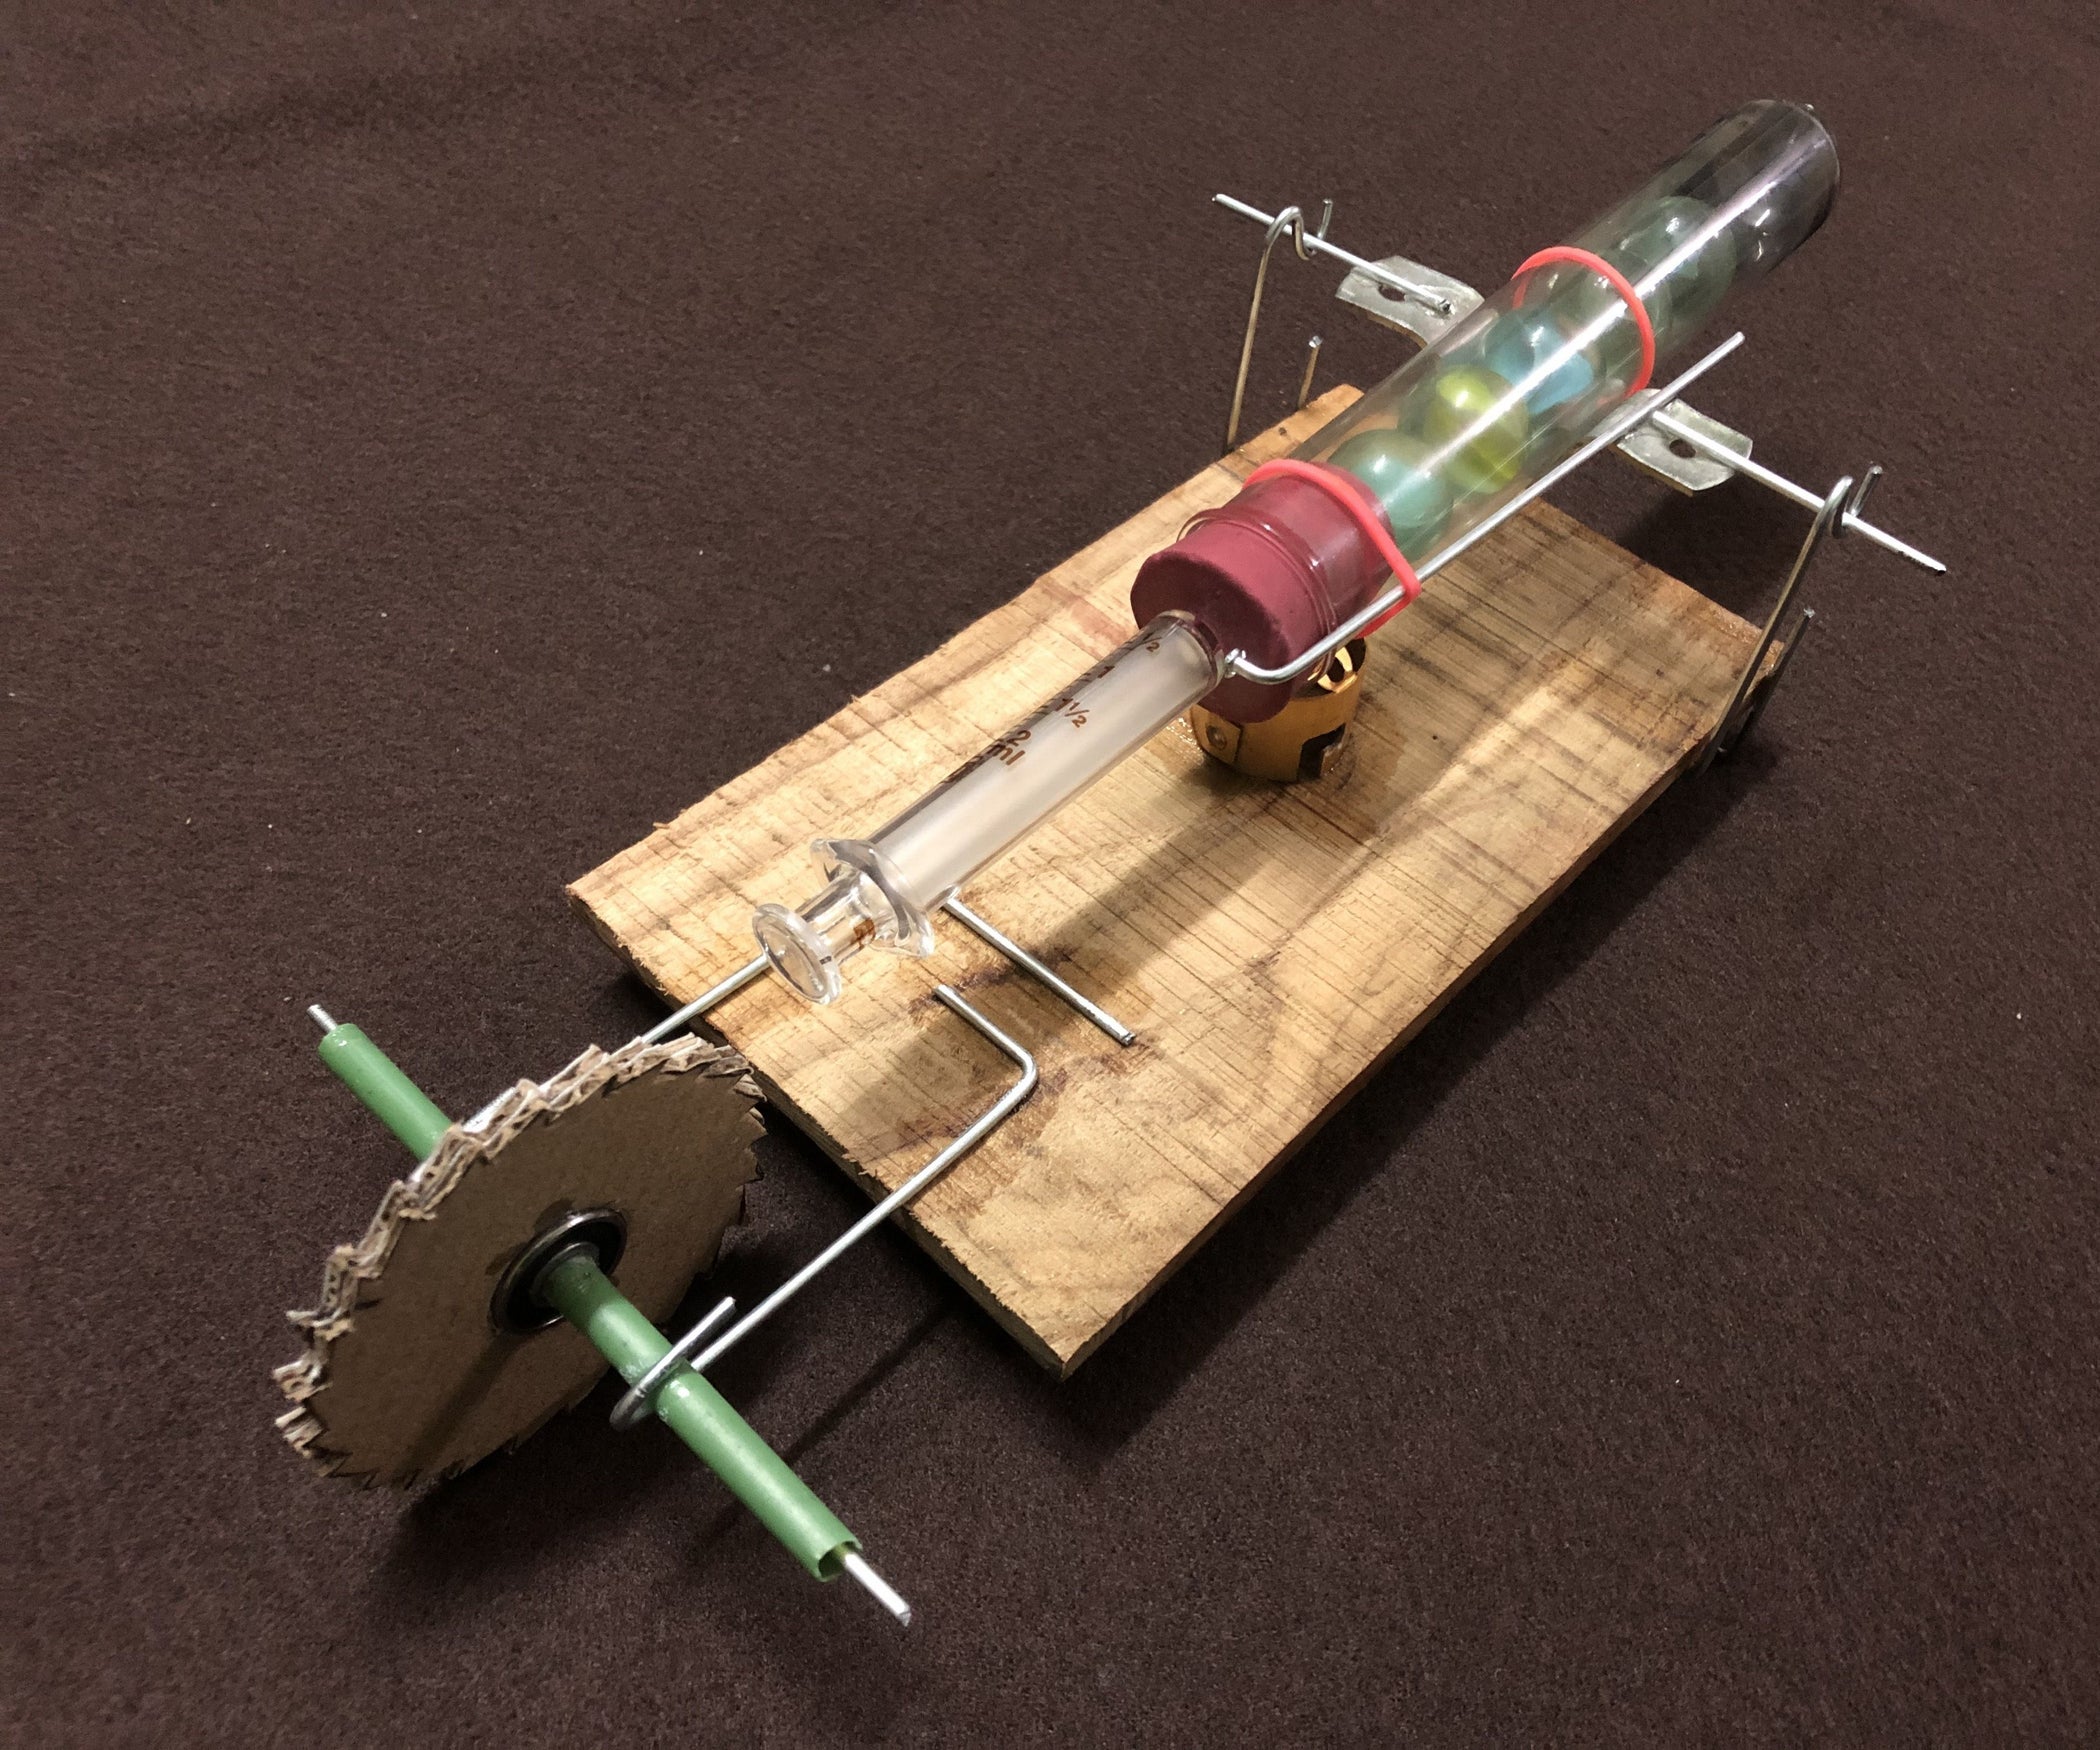 How to Make a Stirling Engine Powered Toy Car?